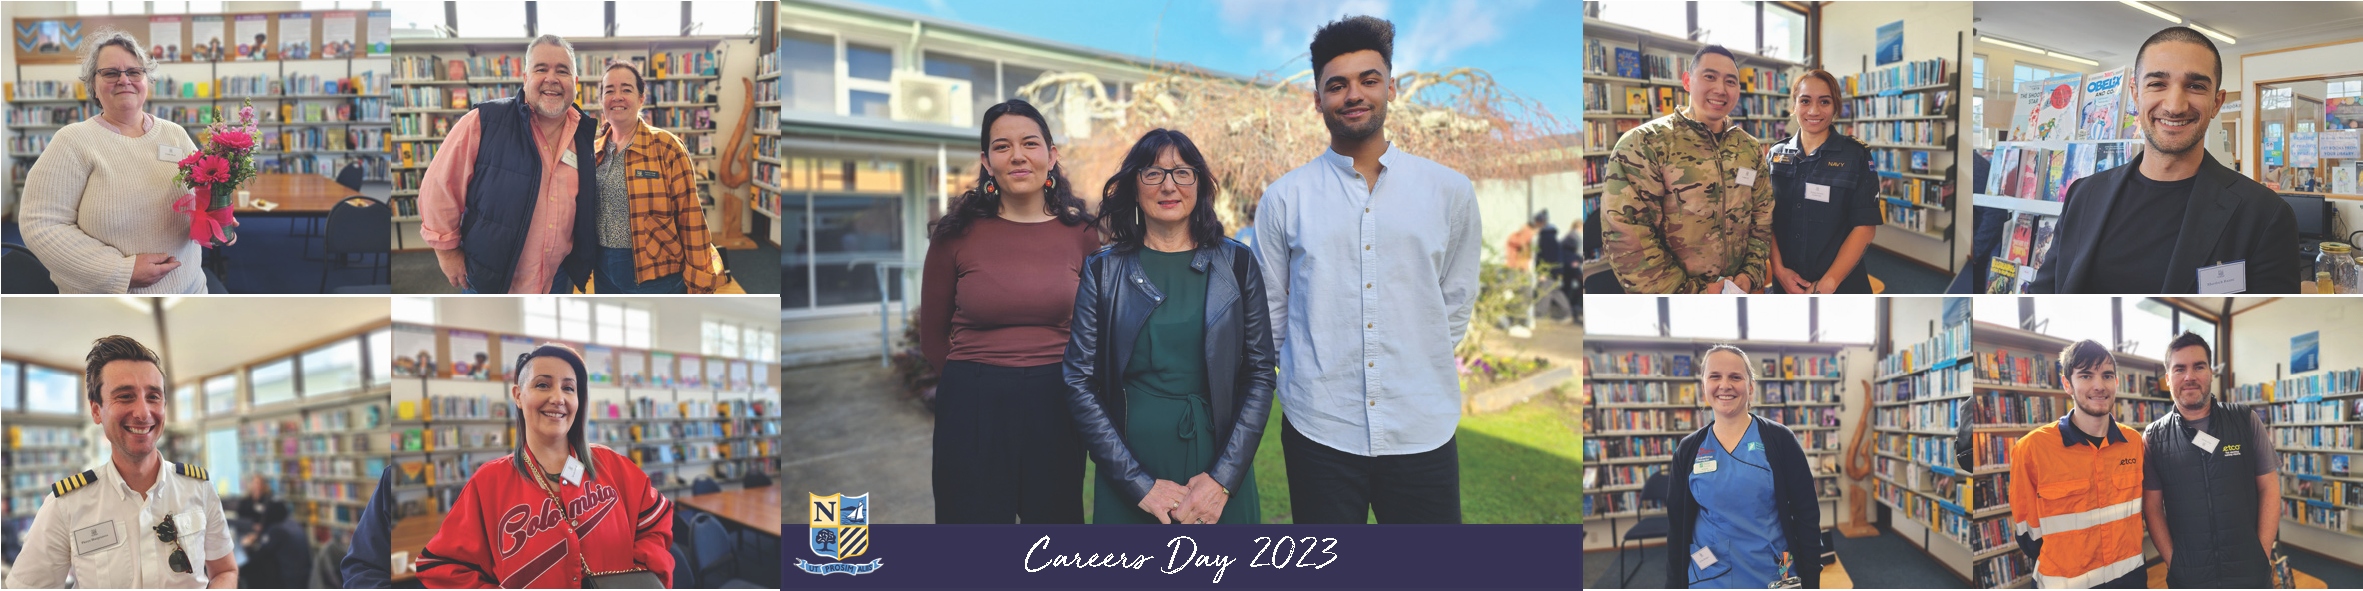 Northcote College Careers Day 2023